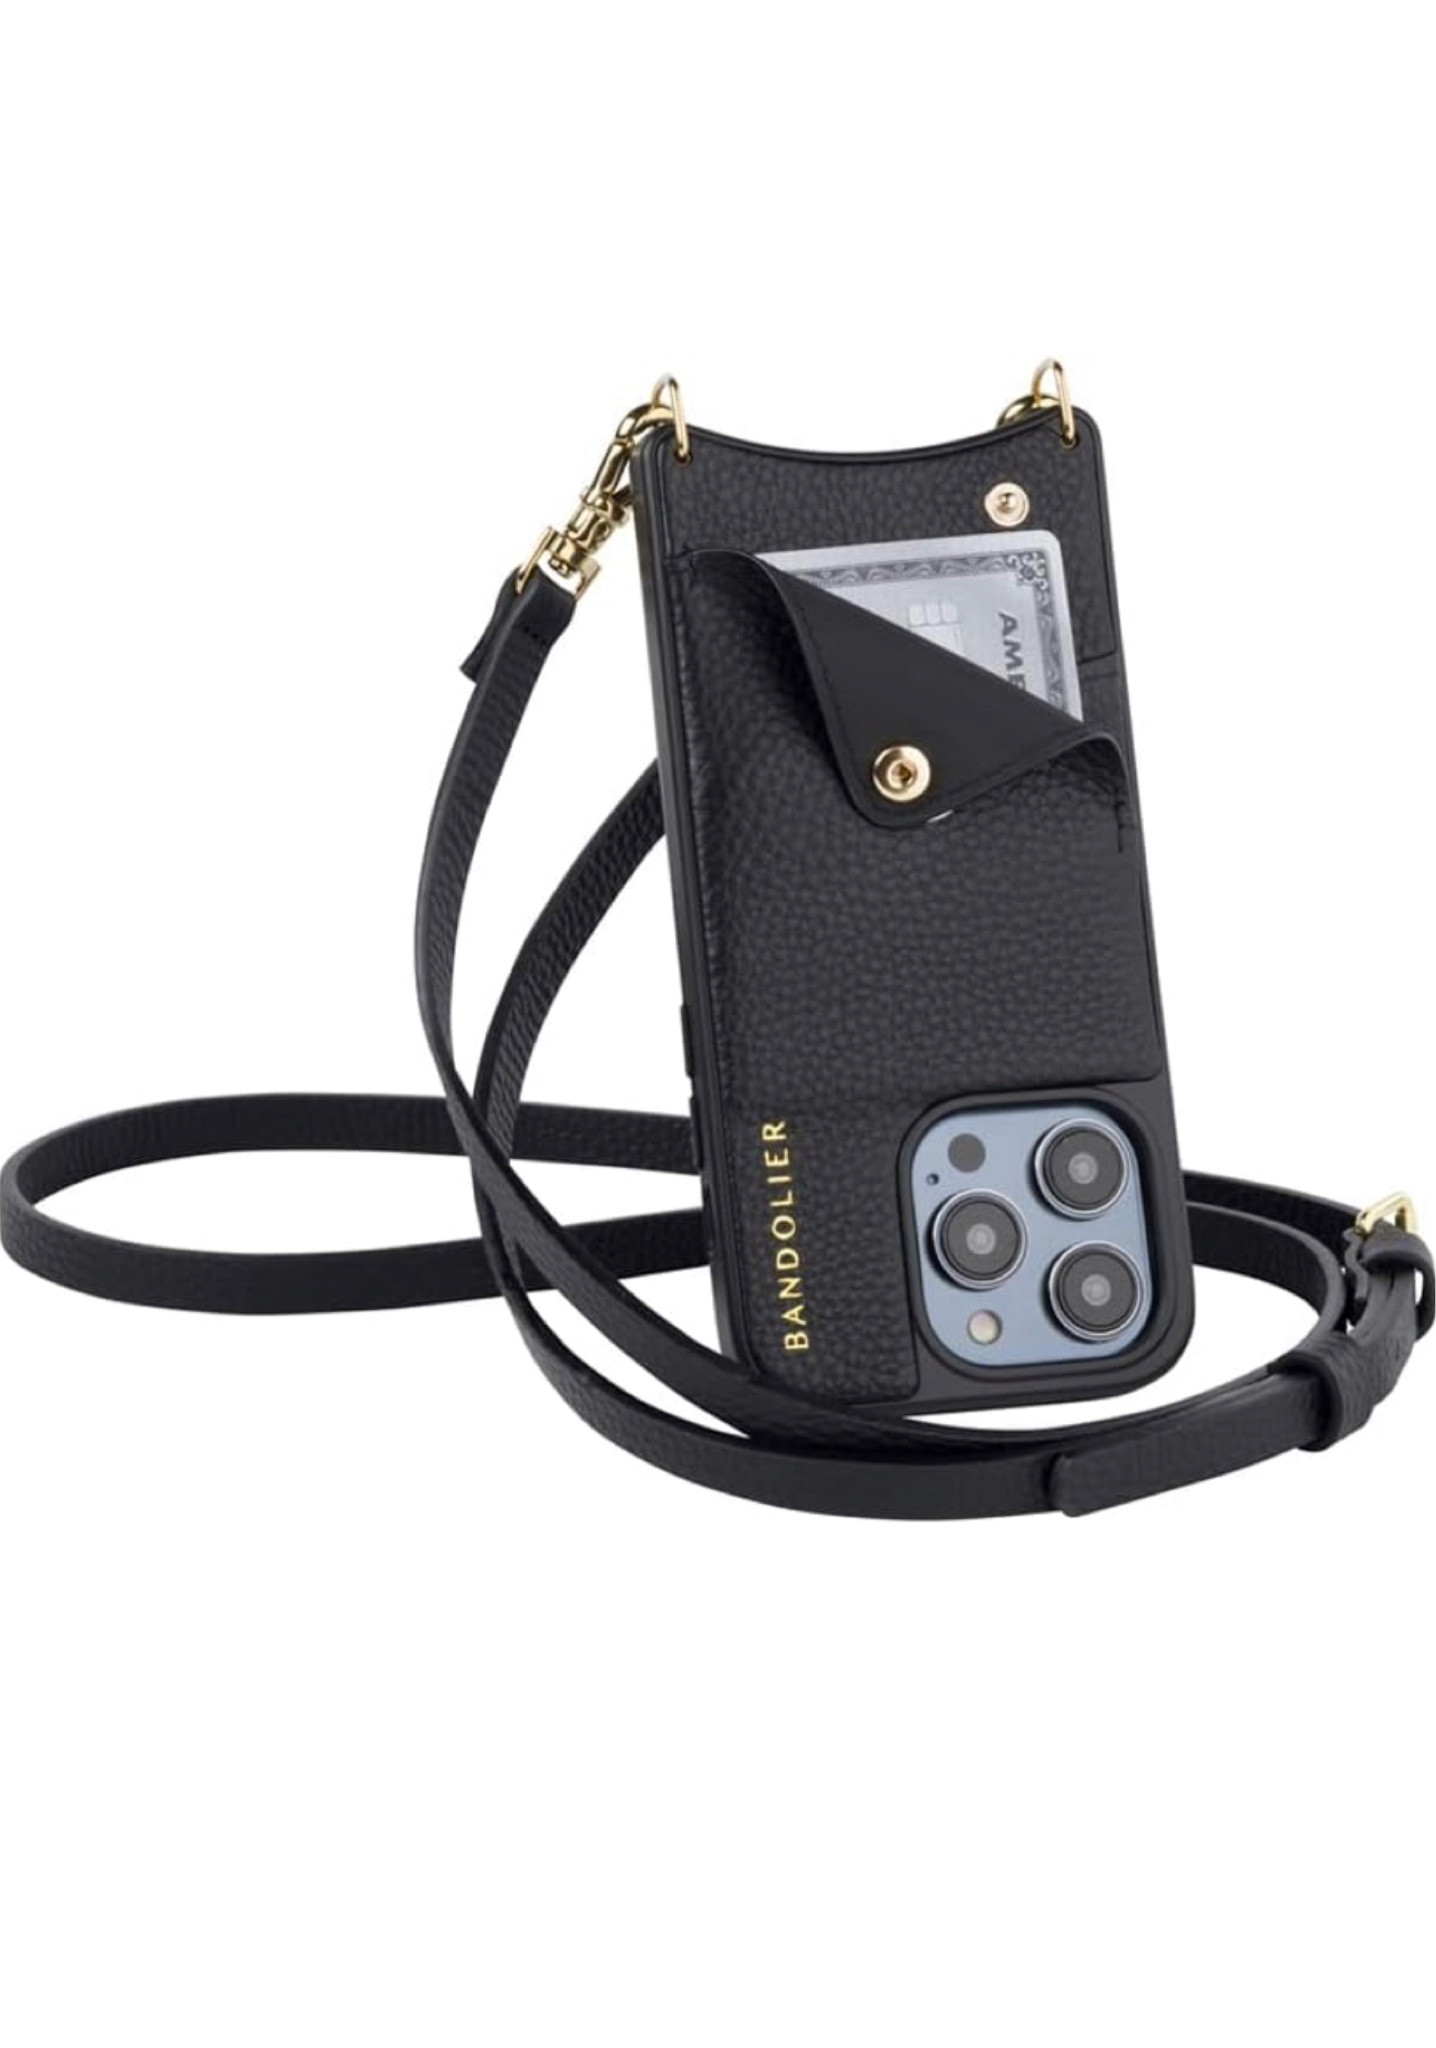  Bandolier Expanded Zip Pouch - Black/Gold - Phone Case